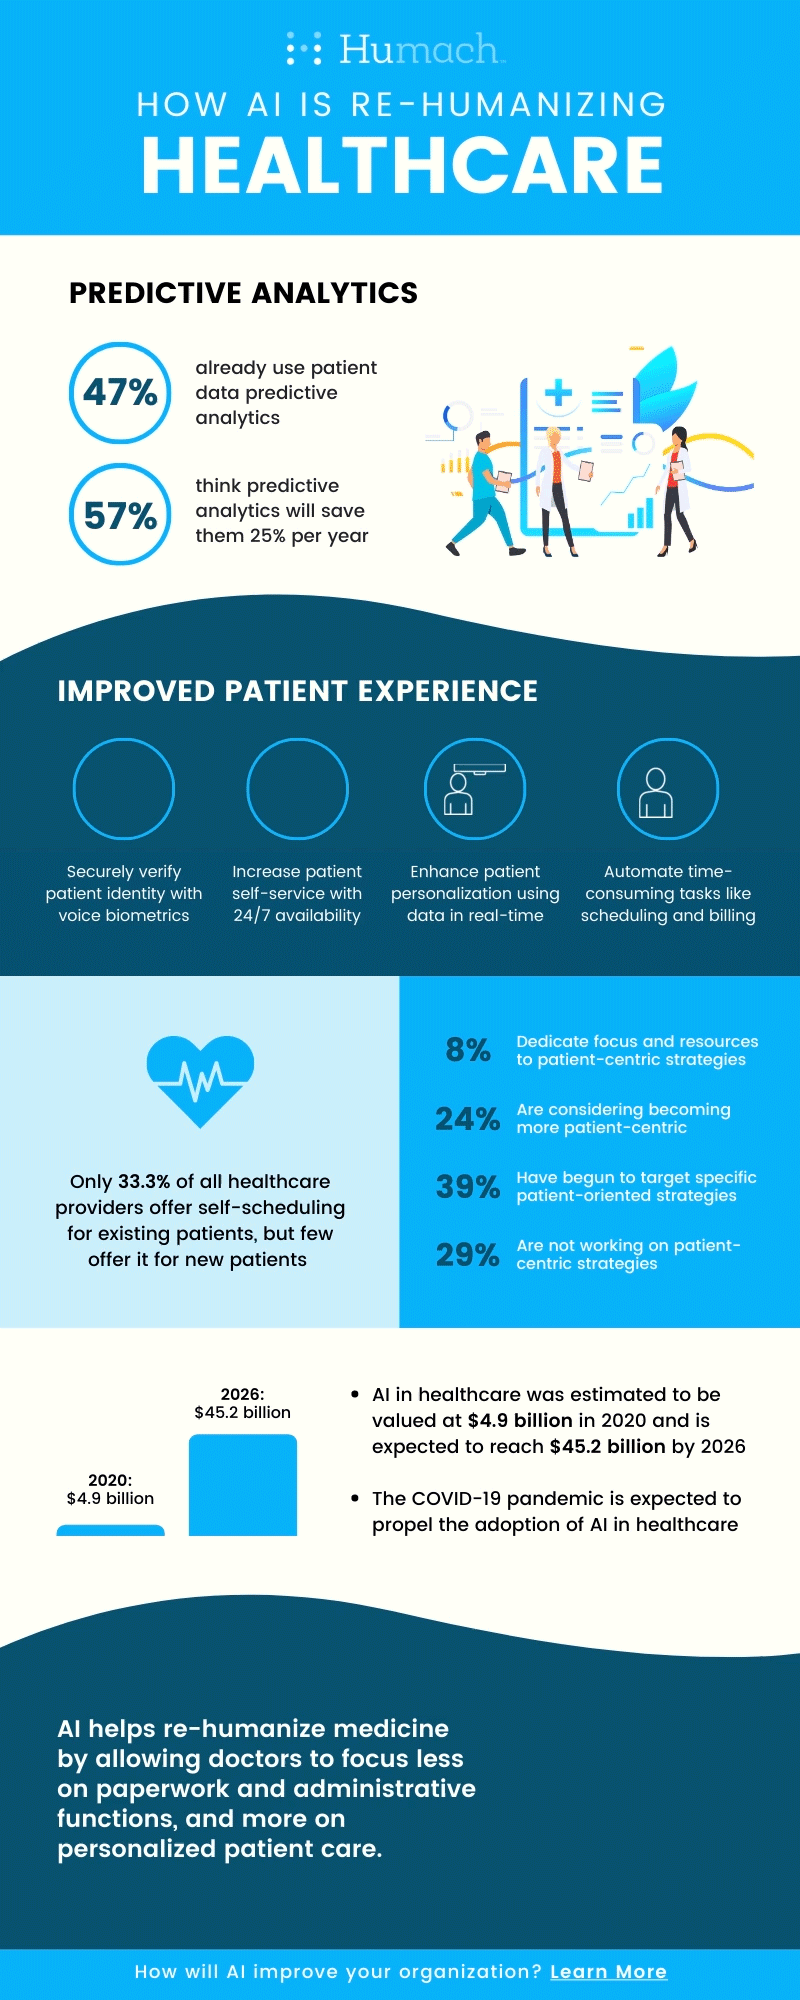 How AI is Re-Humanizing Healthcare Infographic